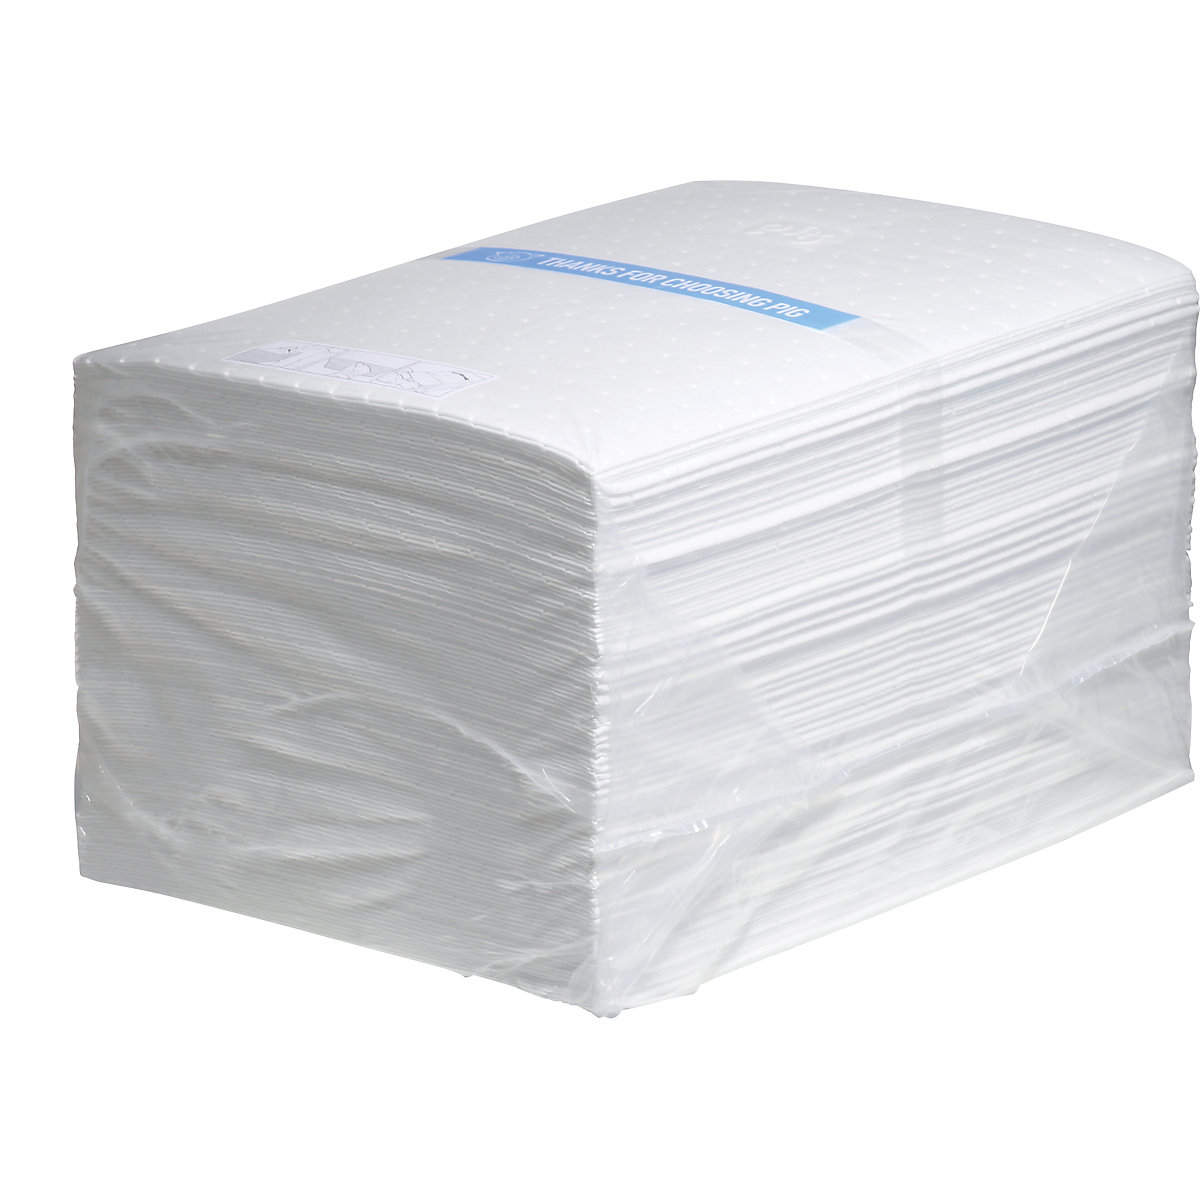 Oil-Only absorbent sheeting mat - PIG